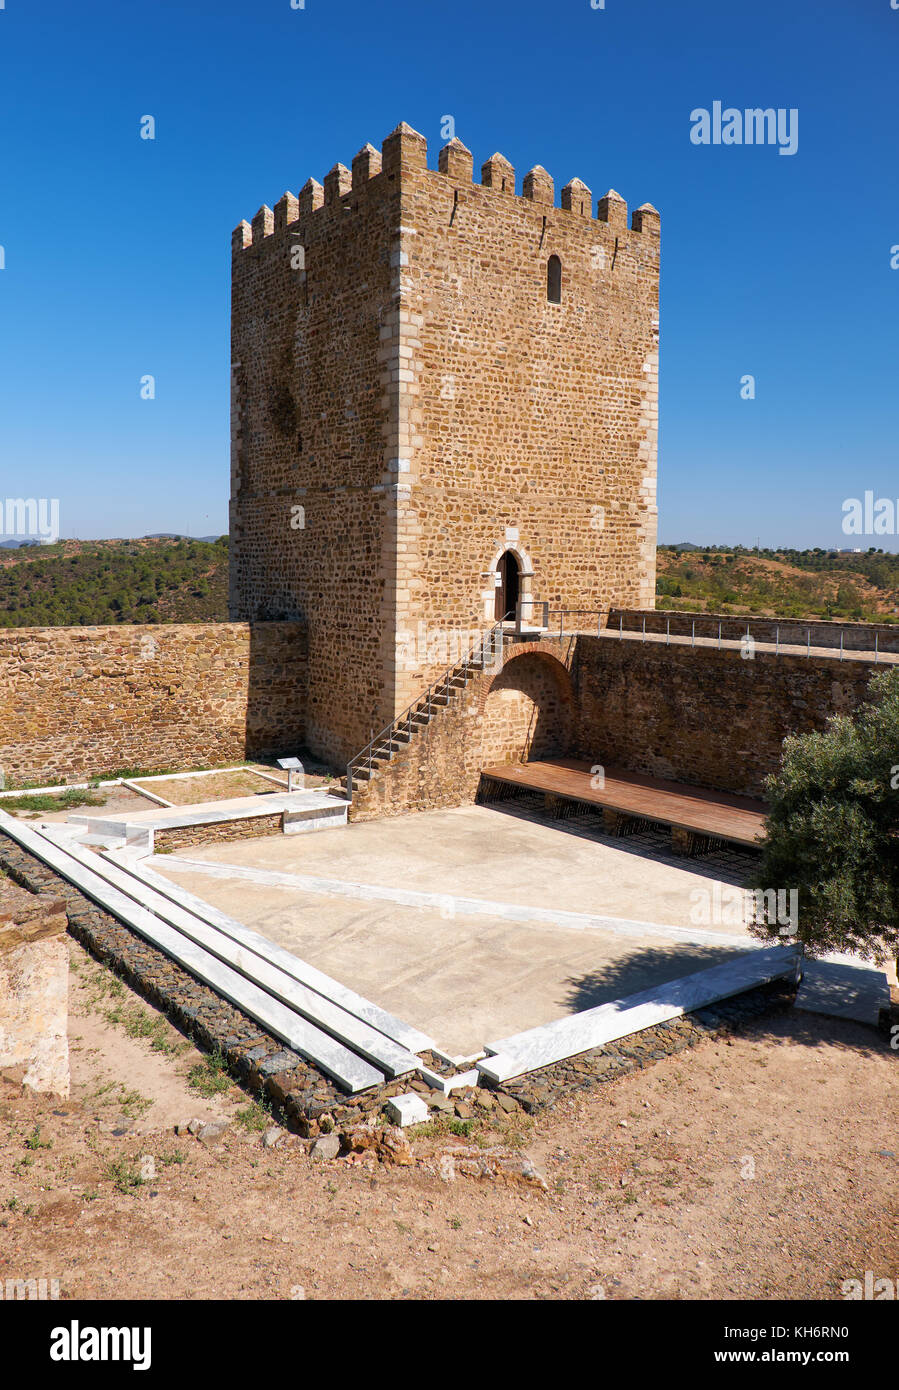 Keep tower of Mertola Castle with the adjoining fortress wall with battlements. Mertola. Portugal Stock Photo